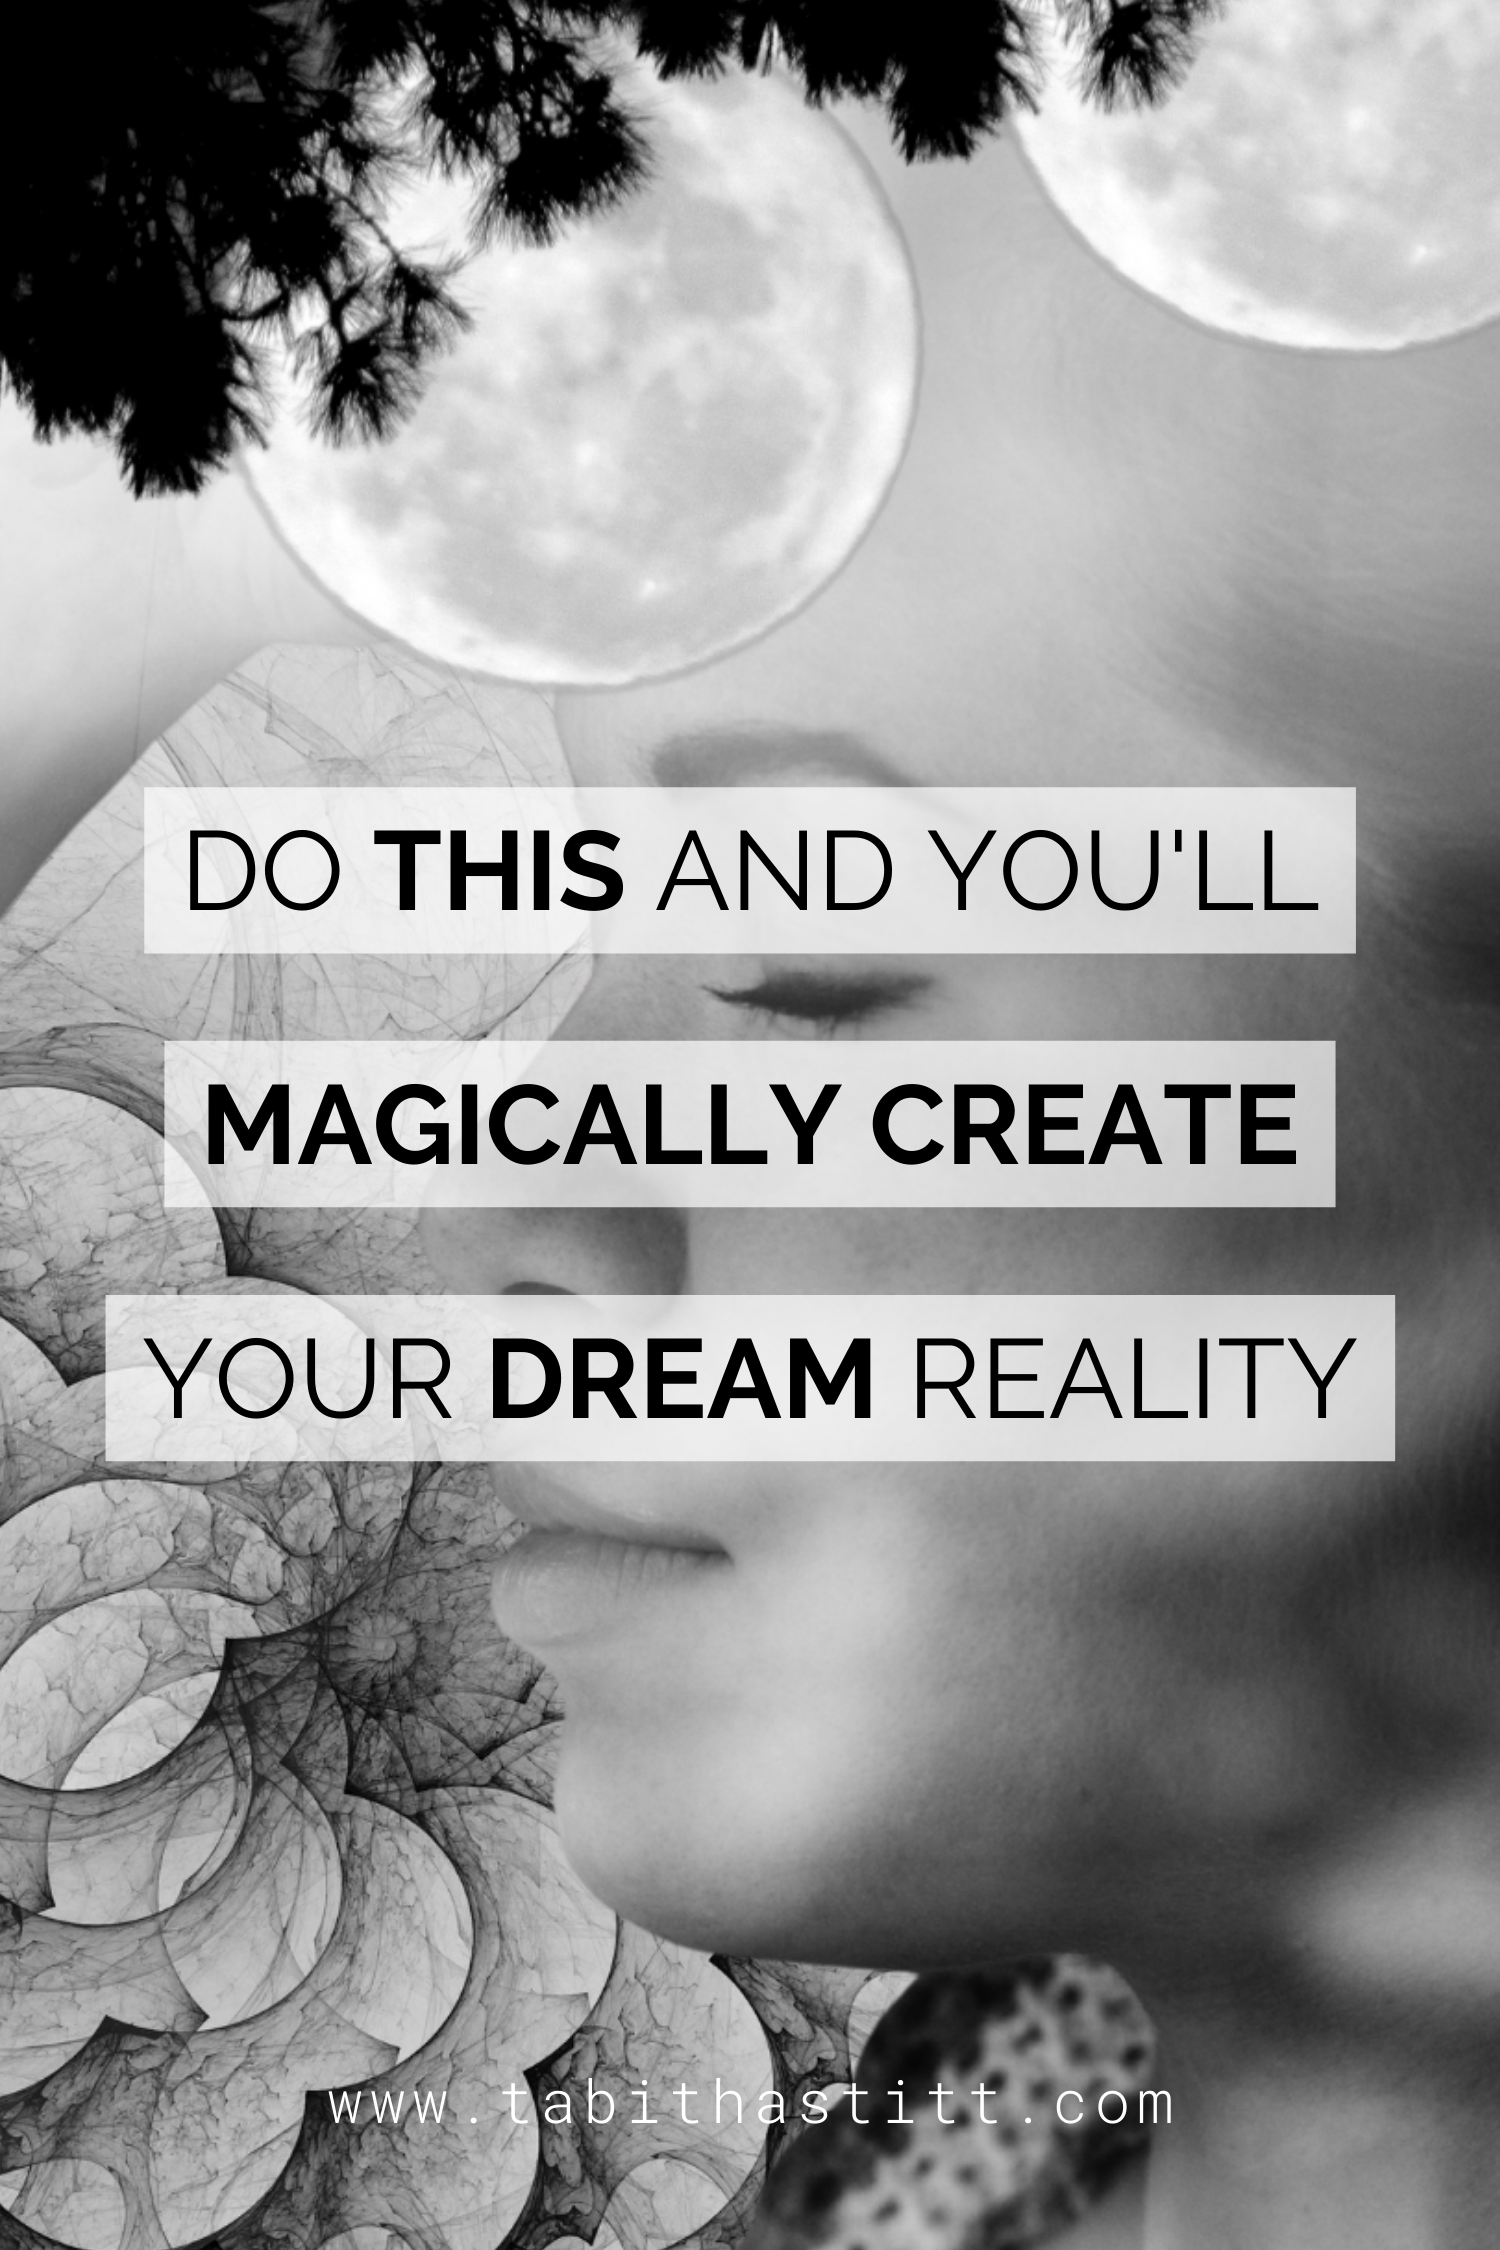 Episode: Do This to Magically Create Your Dream Reality on The Empowering Psychic Podcast with Tabitha Stitt